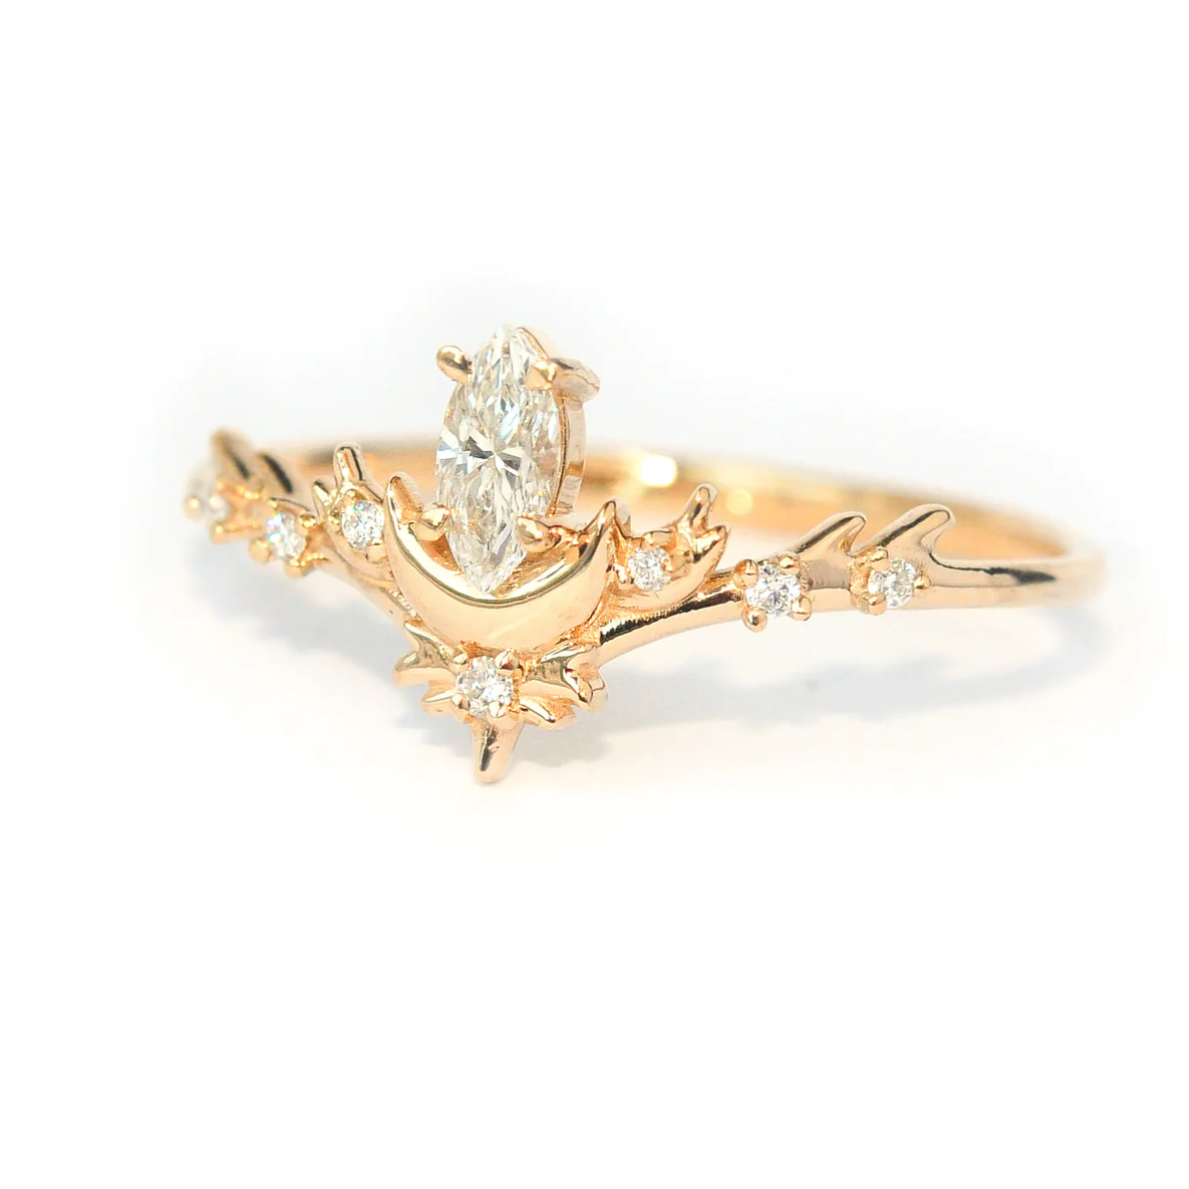 a white marquise diamond sits atop a gold half moon with white diamond melee details